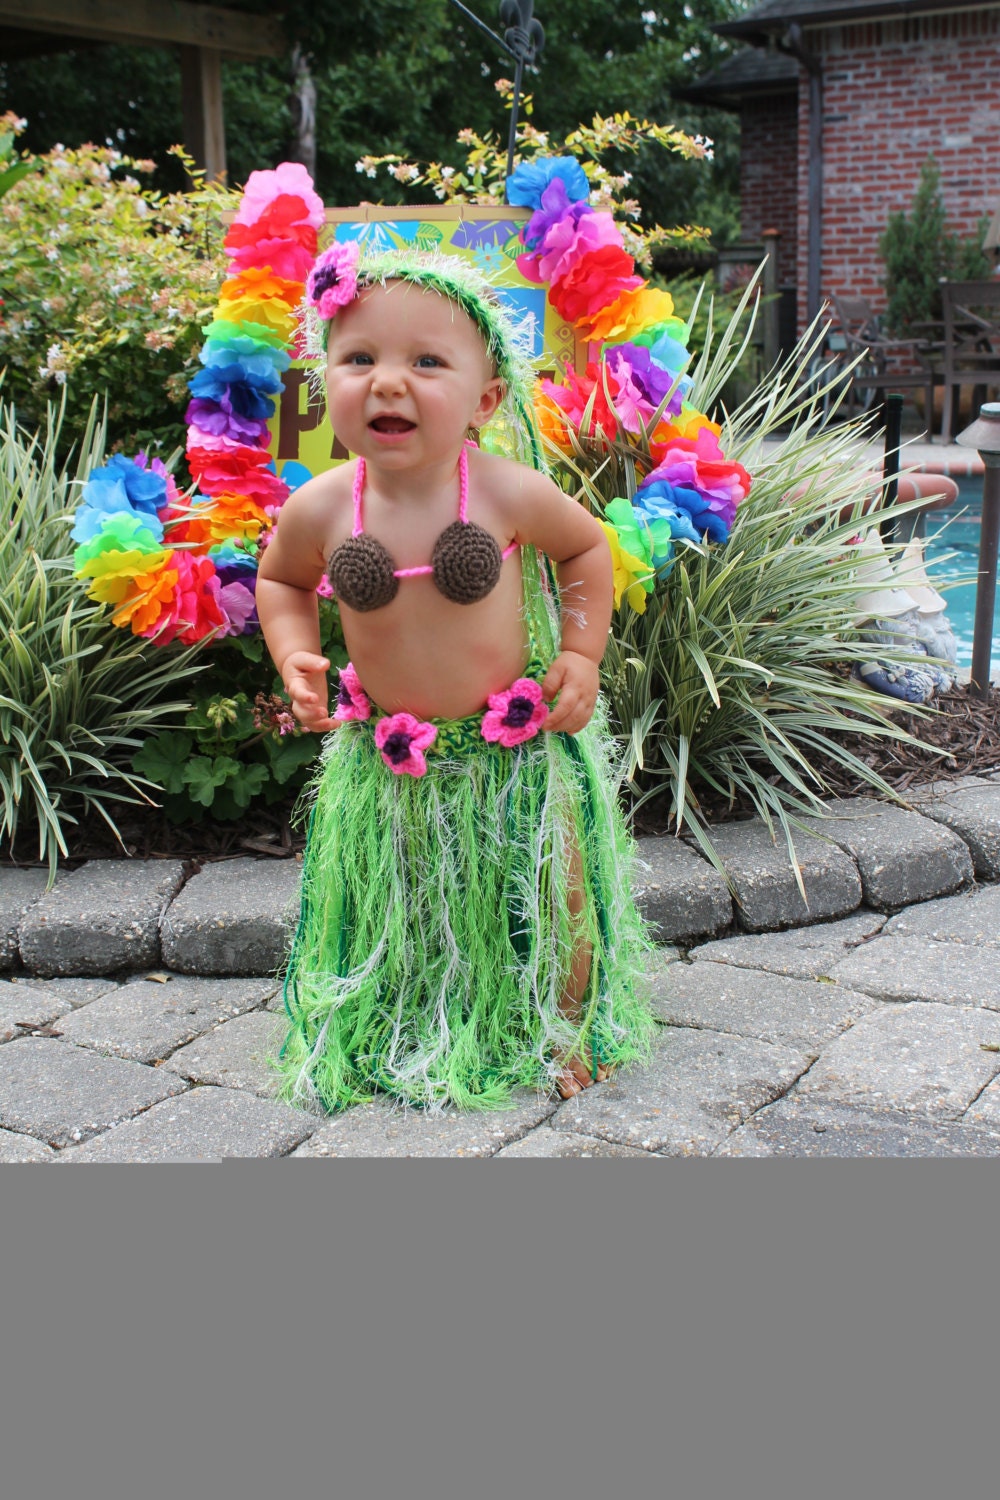 Details about   Hawaii Hula Girl Costume with Raffia Skirt and Coconut Top TODDLER 